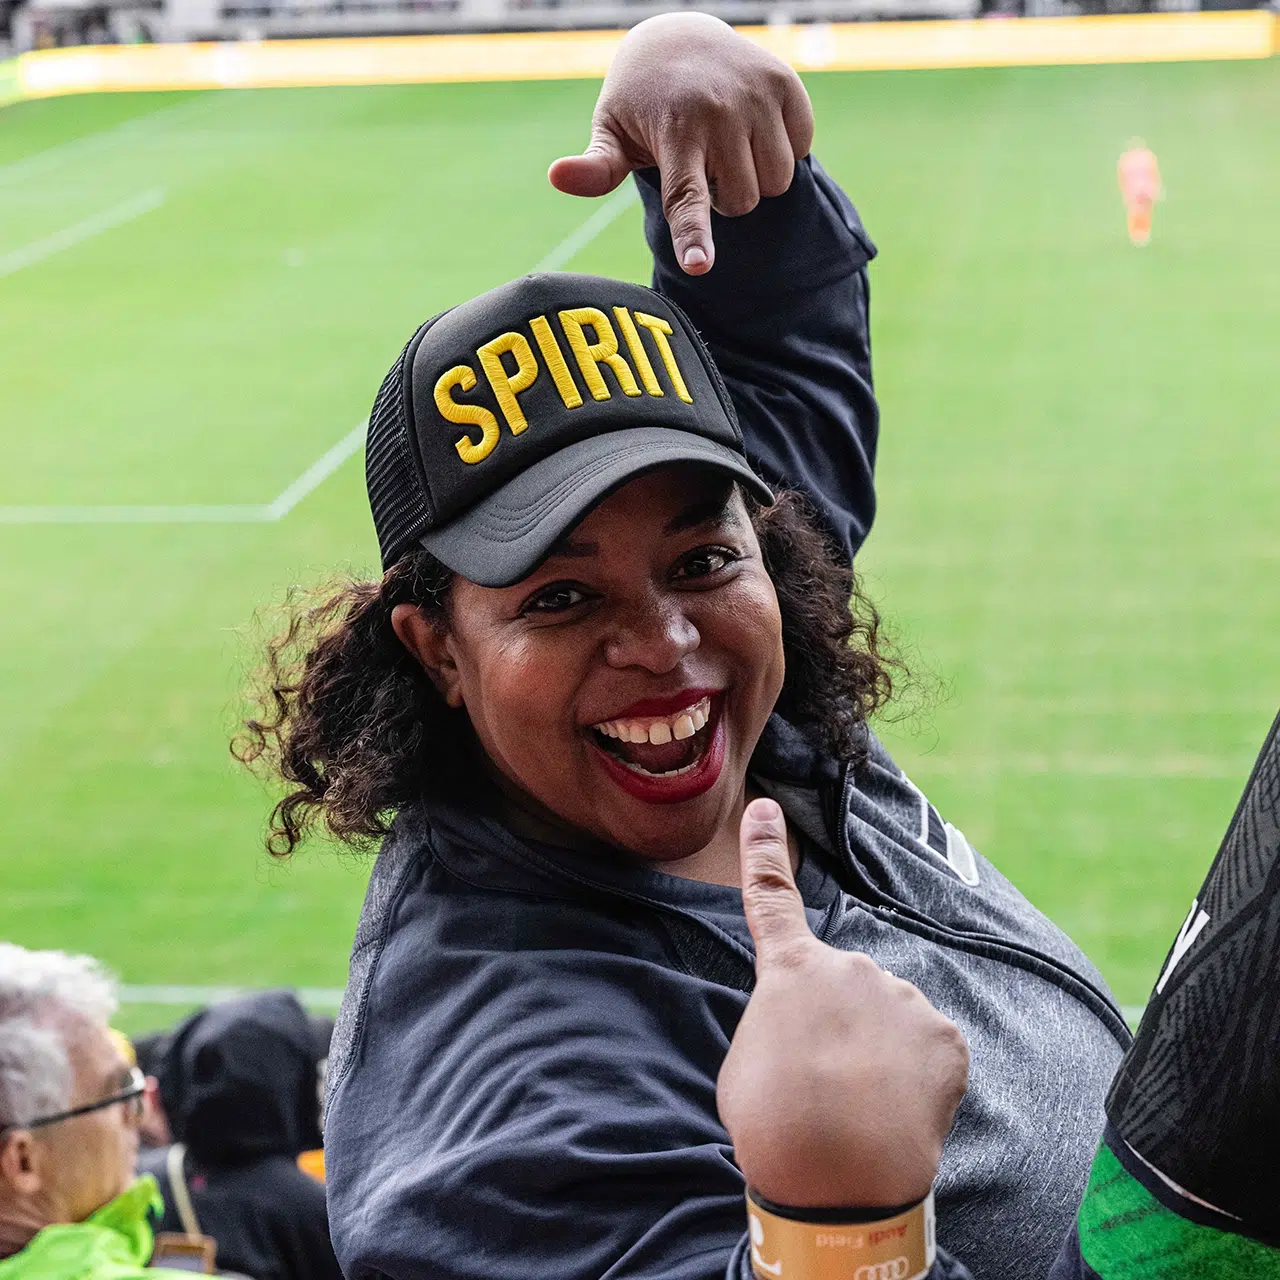 A fan points to her black and yellow SPIRIT hat.